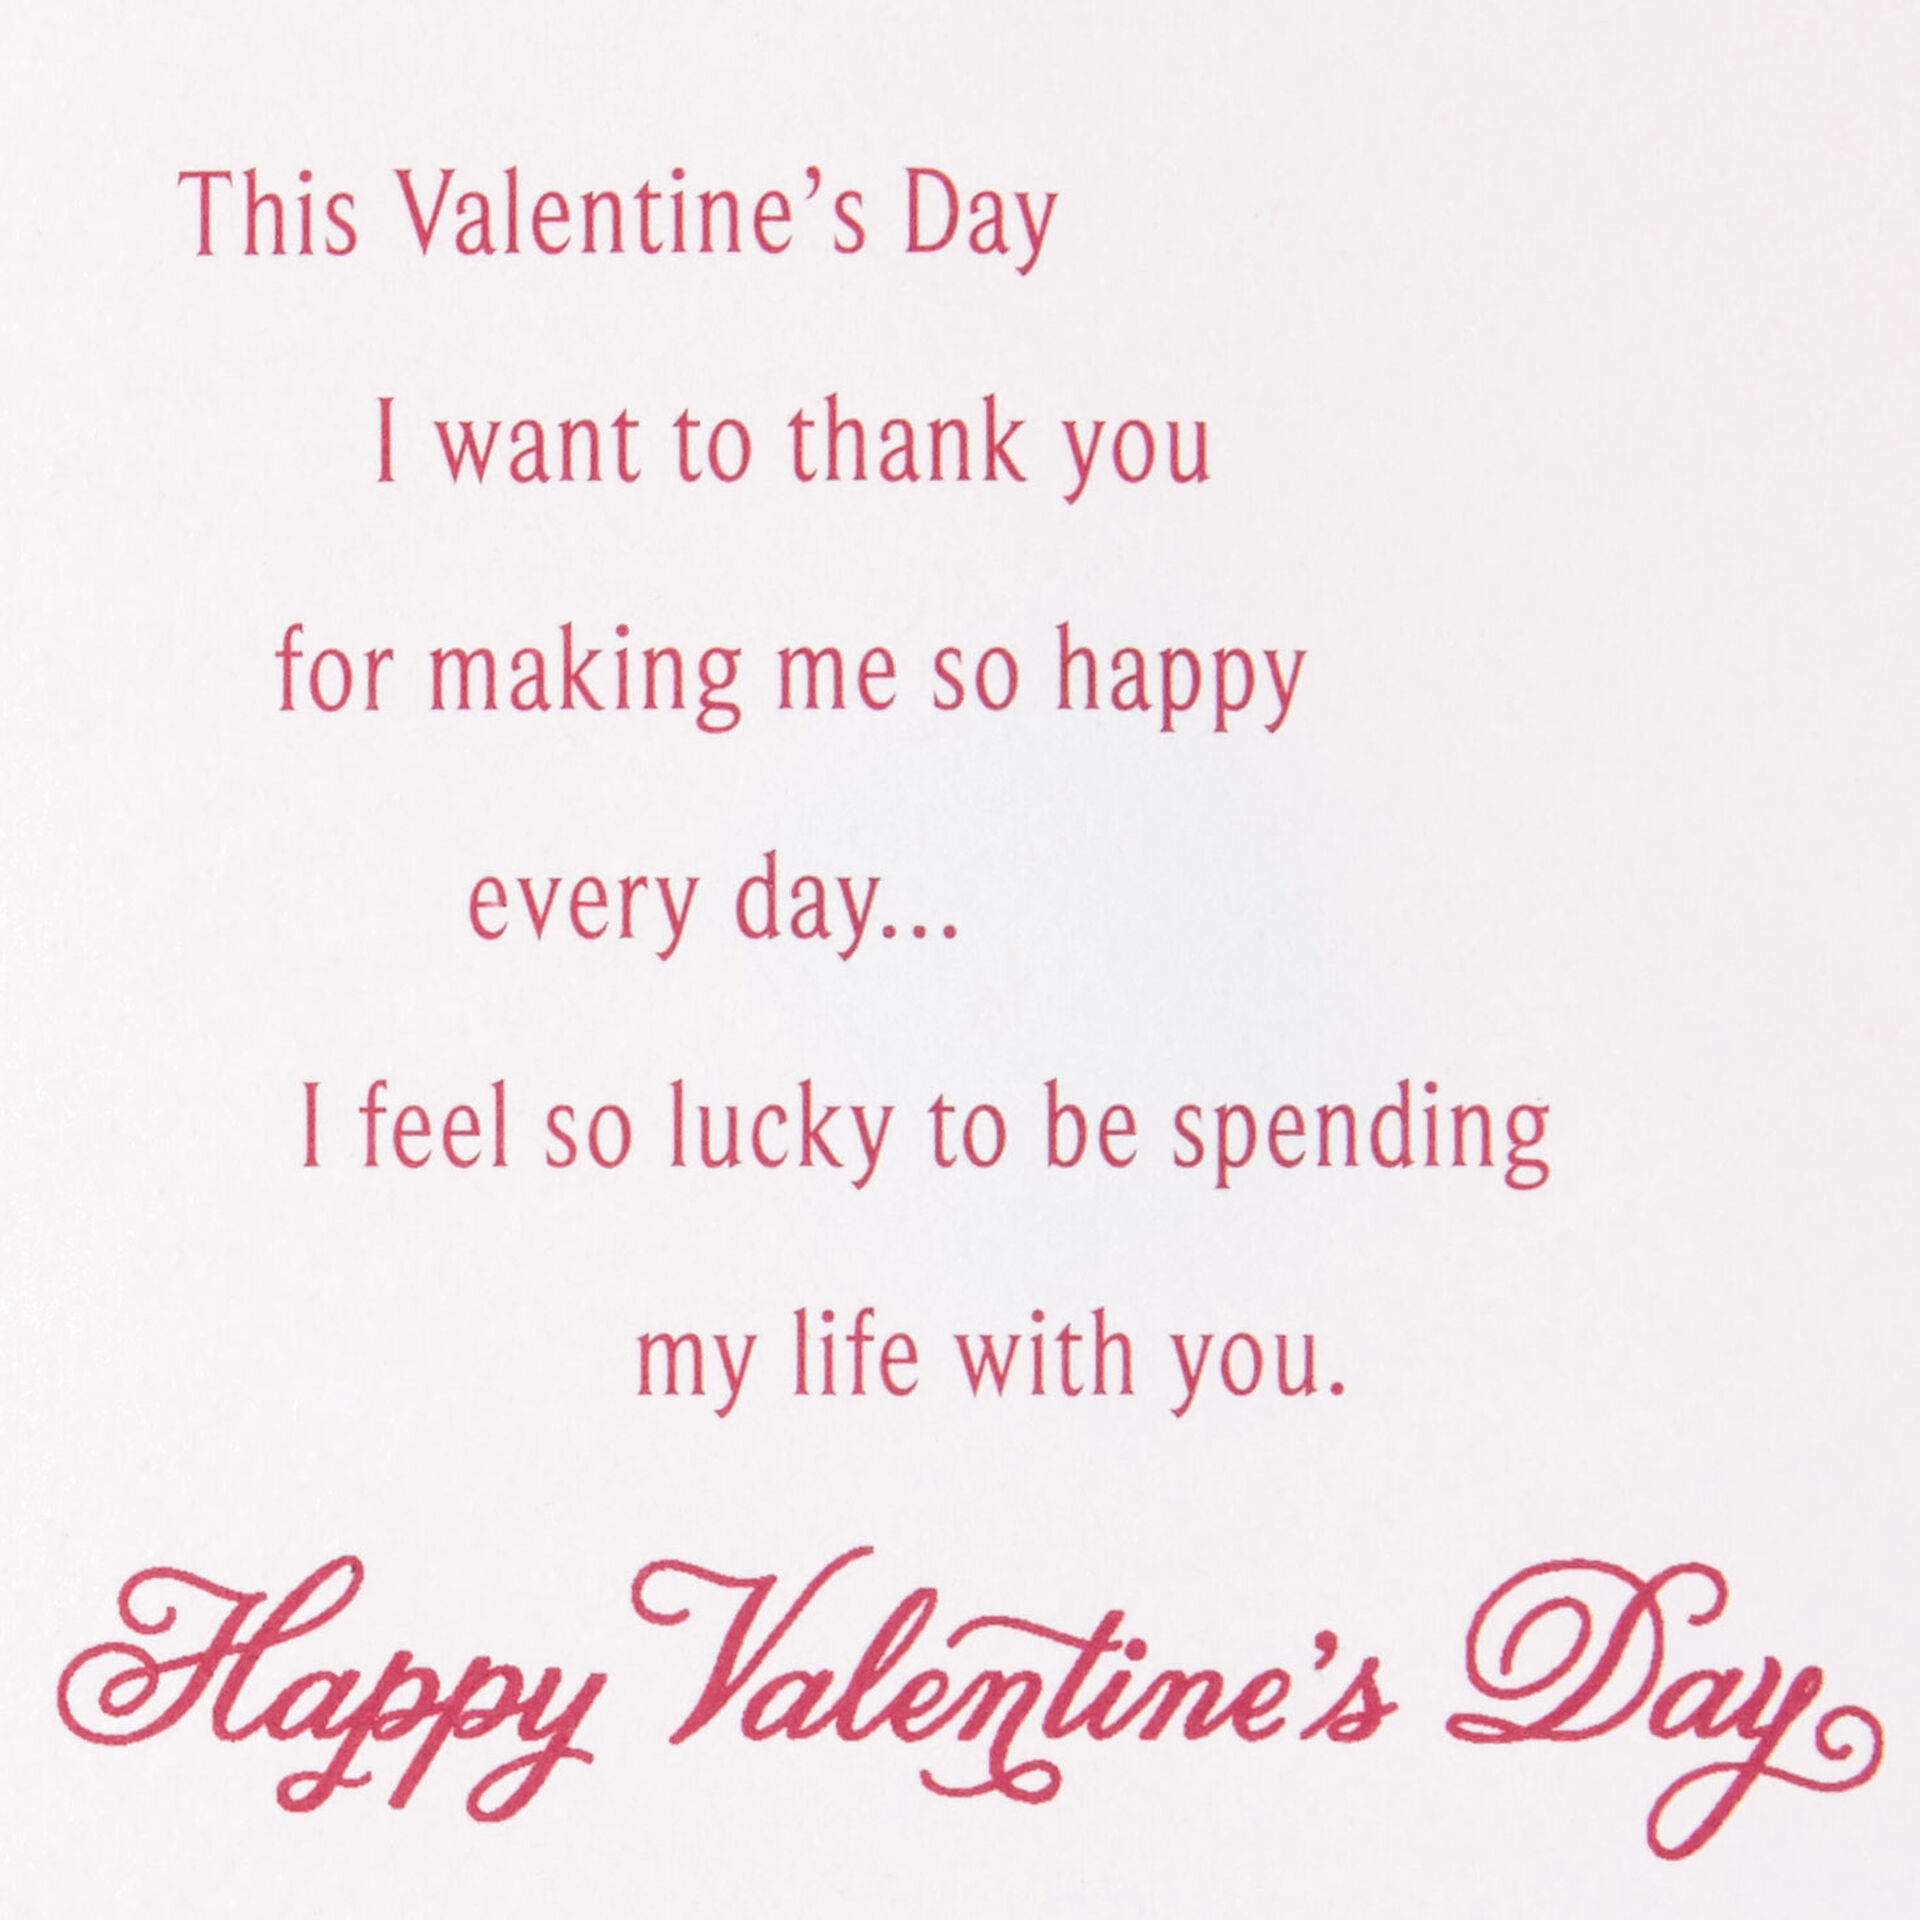 I'm Thinking About Us Valentine's Day Card - Greeting Cards - Hallmark